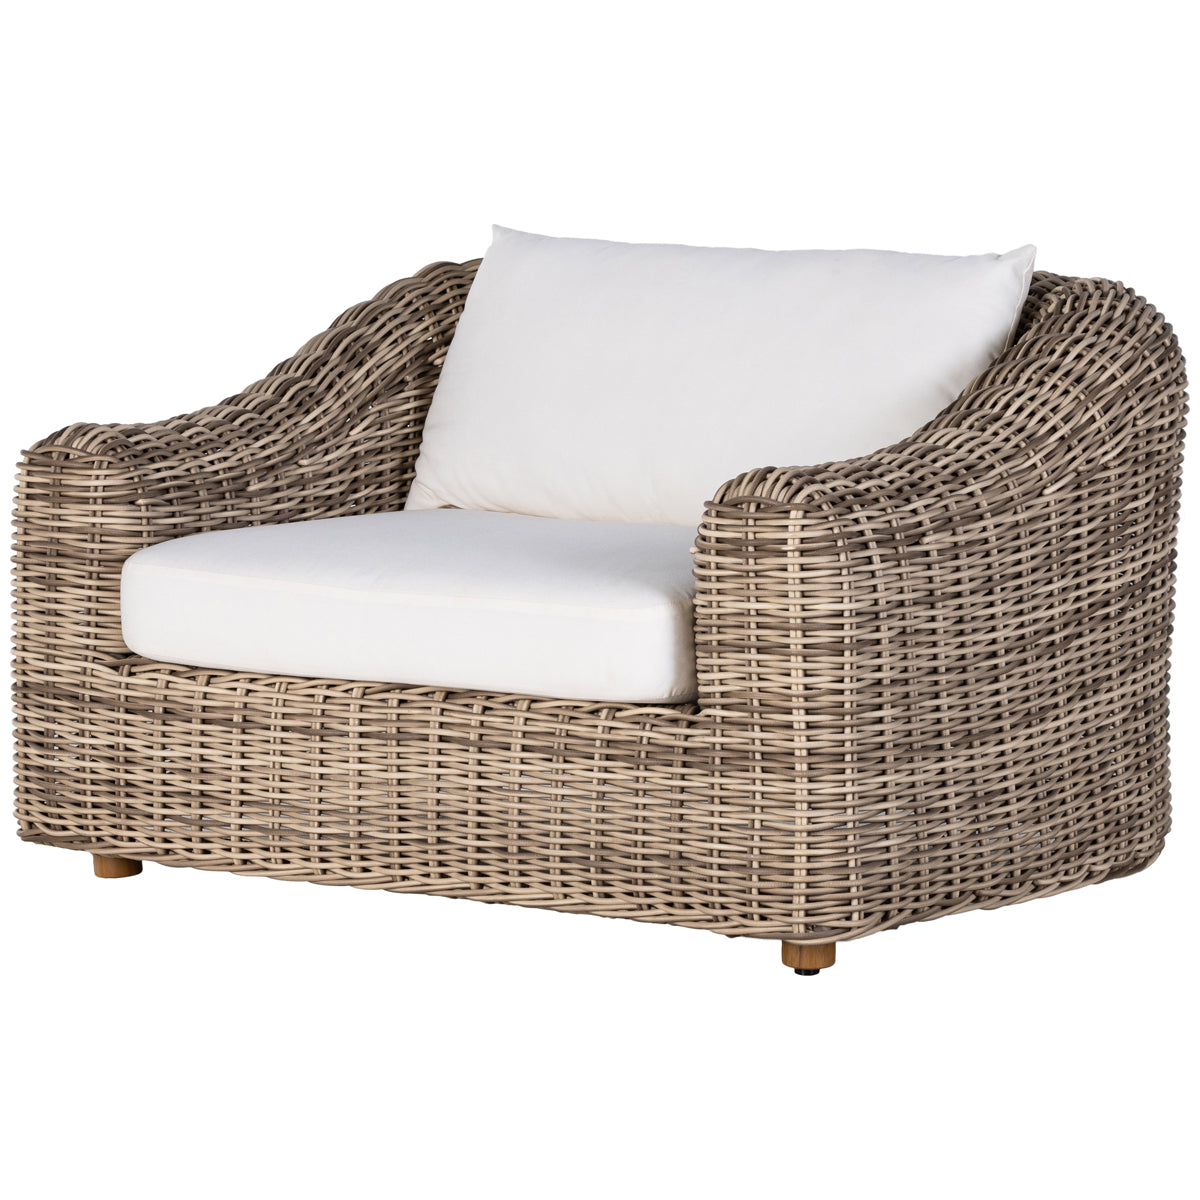 Four Hands Pembrook Messina Outdoor Chair - Natural